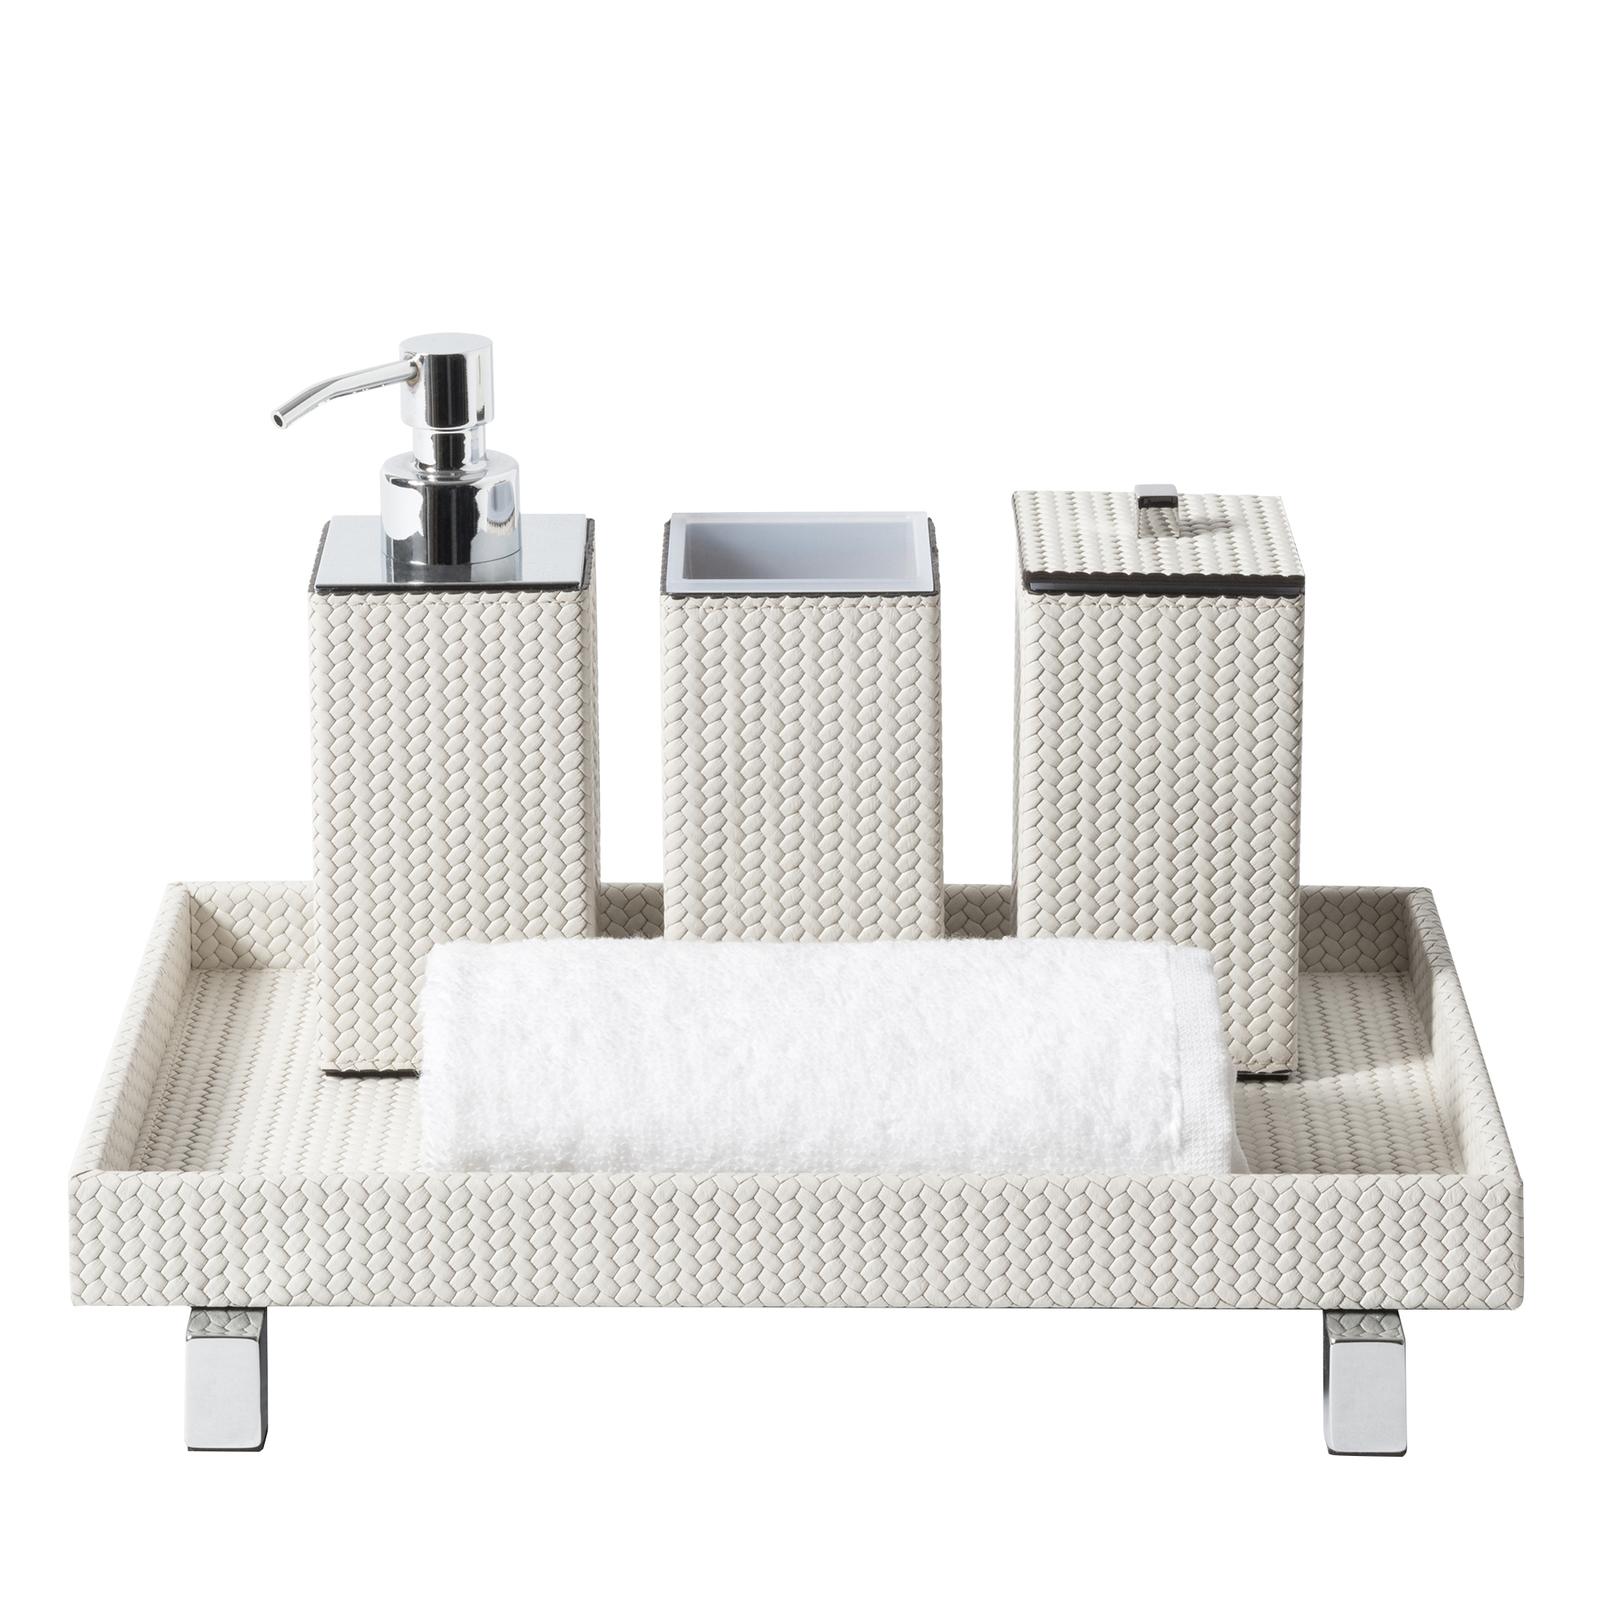 This exquisite bathroom set is an elegant addition to a contemporary bathroom or powder room, where it will provide a precious collection of items with a cohesive and sophisticated look. All covered in white leather enlivened by a striking texture,